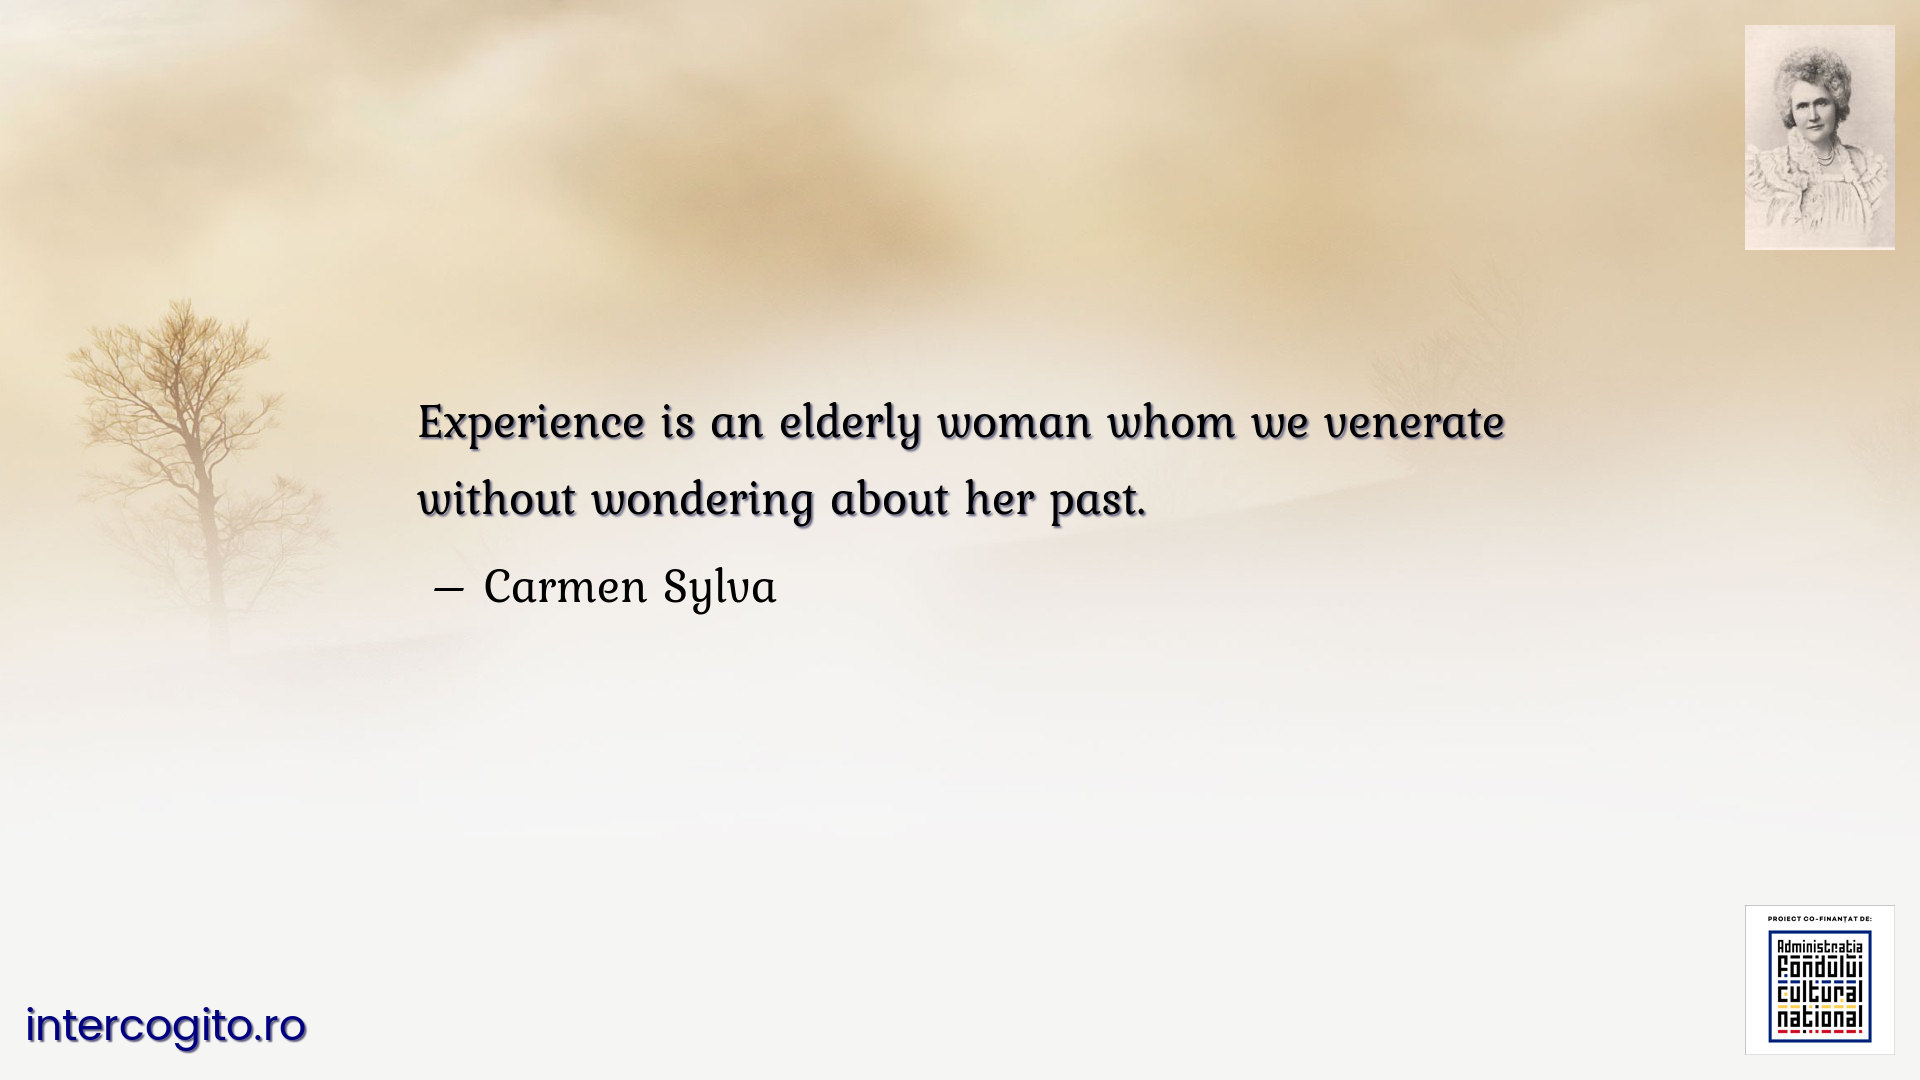 Experience is an elderly woman whom we venerate without wondering about her past.